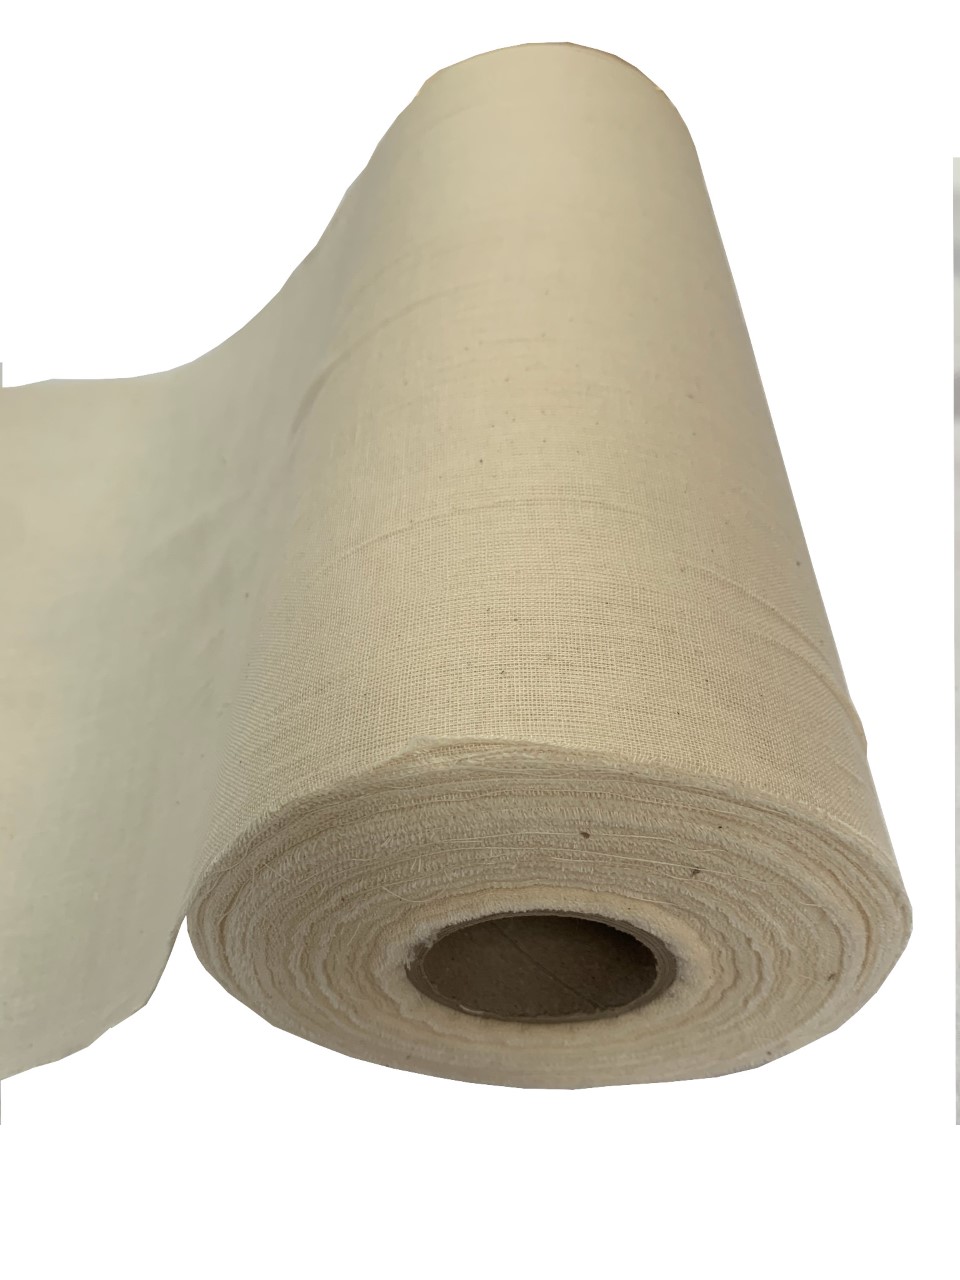 14" Unbleached Grade 90 Cheesecloth Roll - 100 Yards